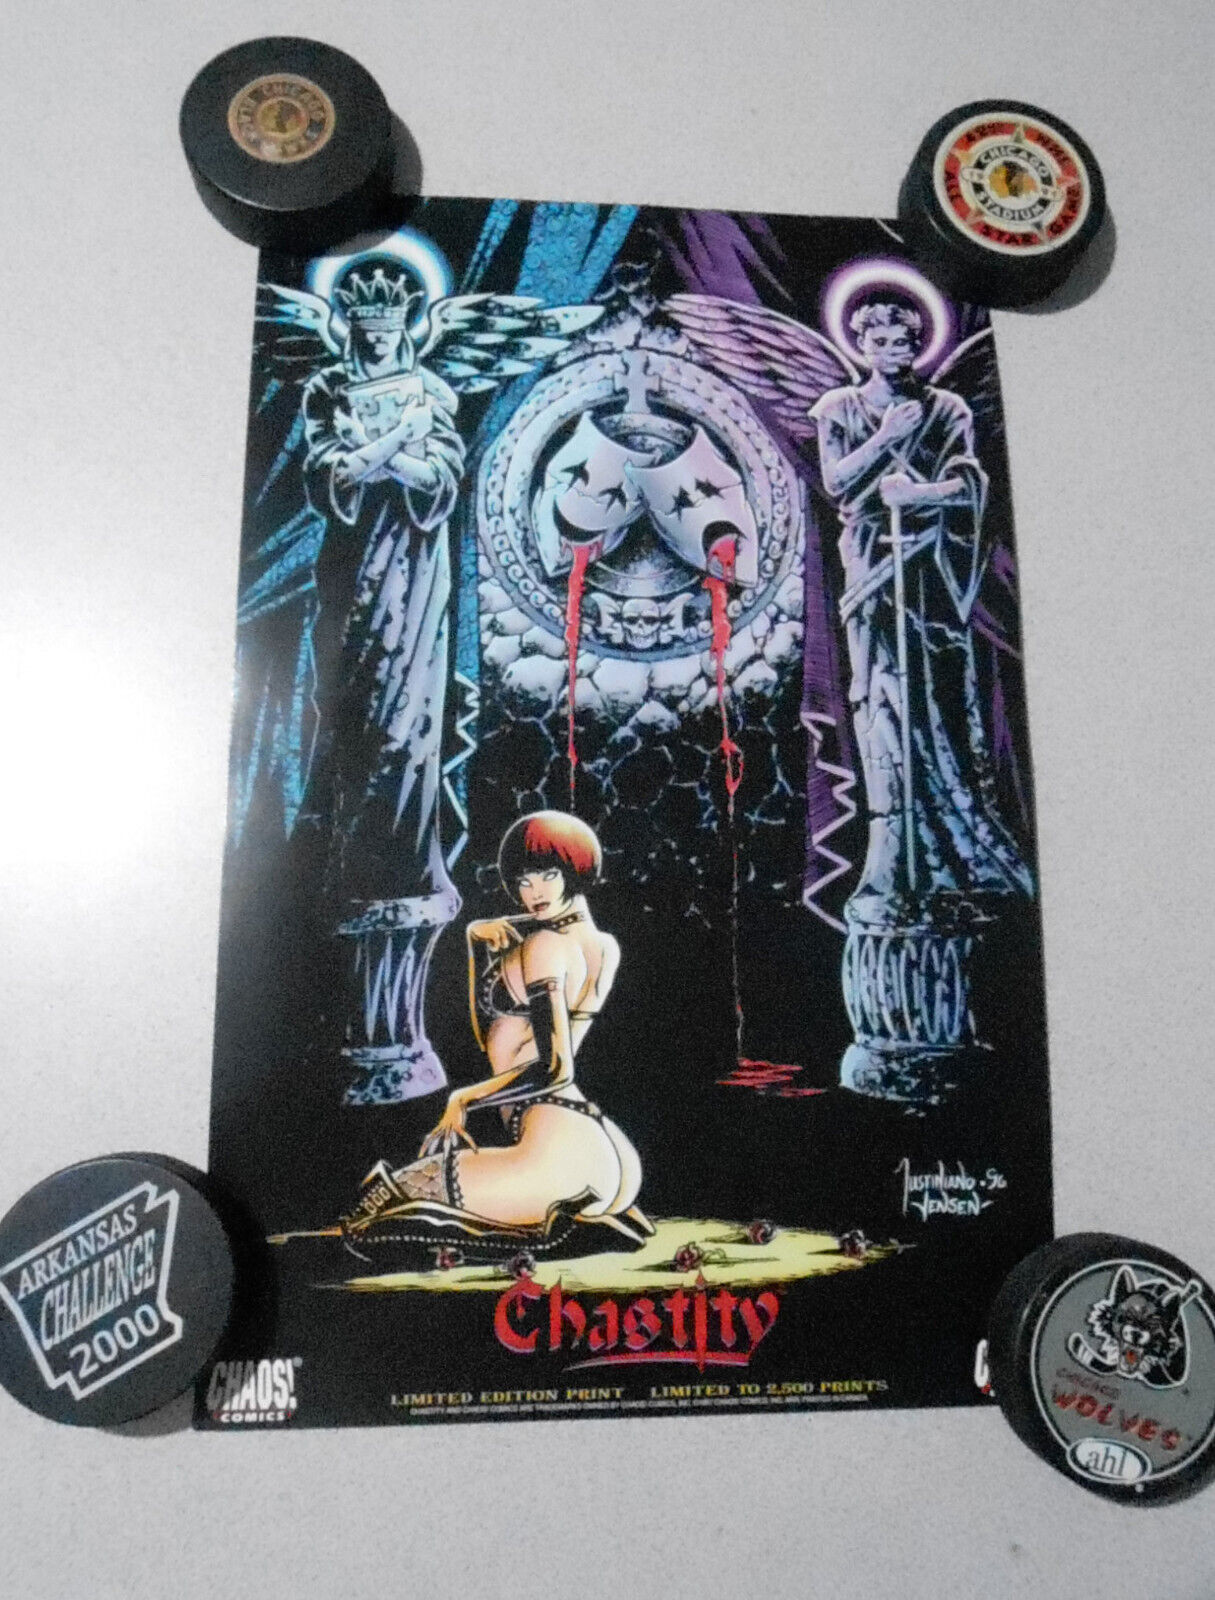 Vintage Chaos 1996 Chastity Print 11x17 Limited 2500 Art by Justiano Jenson RARE